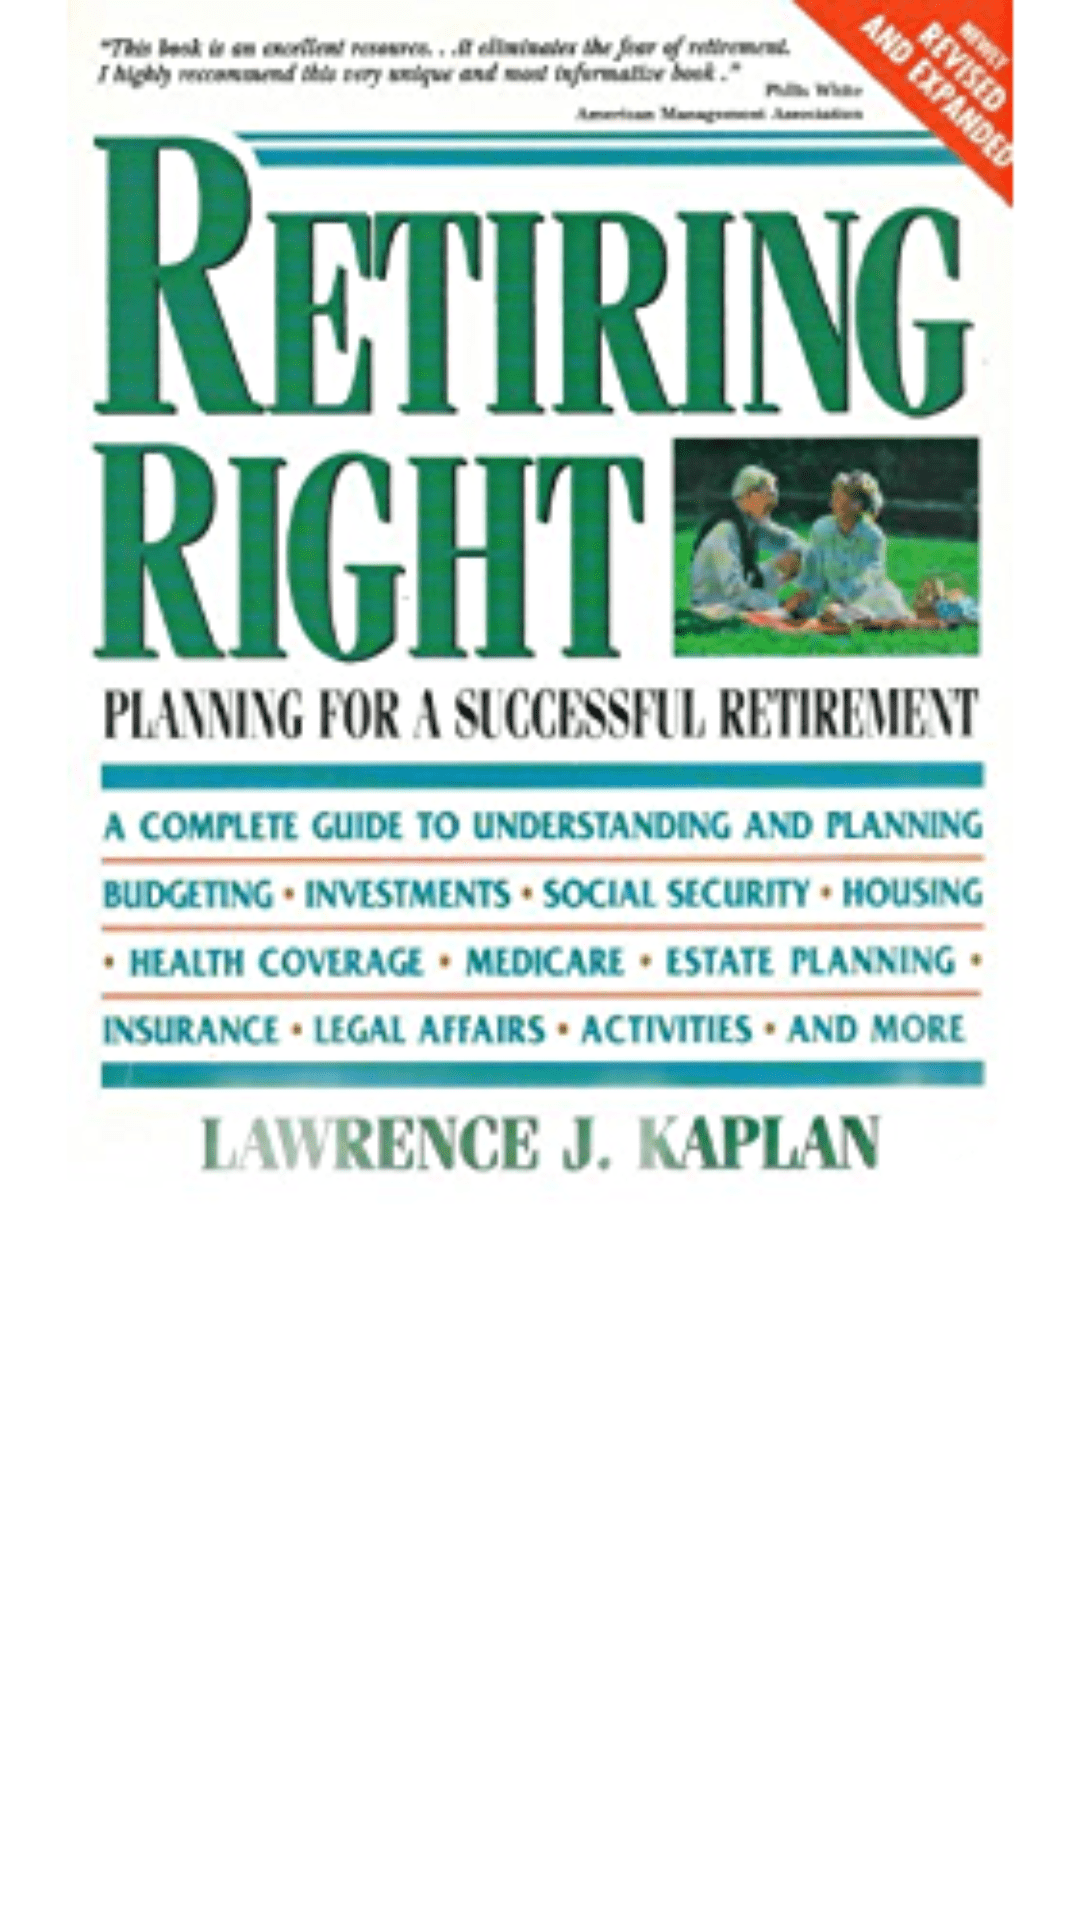 Retiring Right, Third Edition: Planning for a Successful Retirement